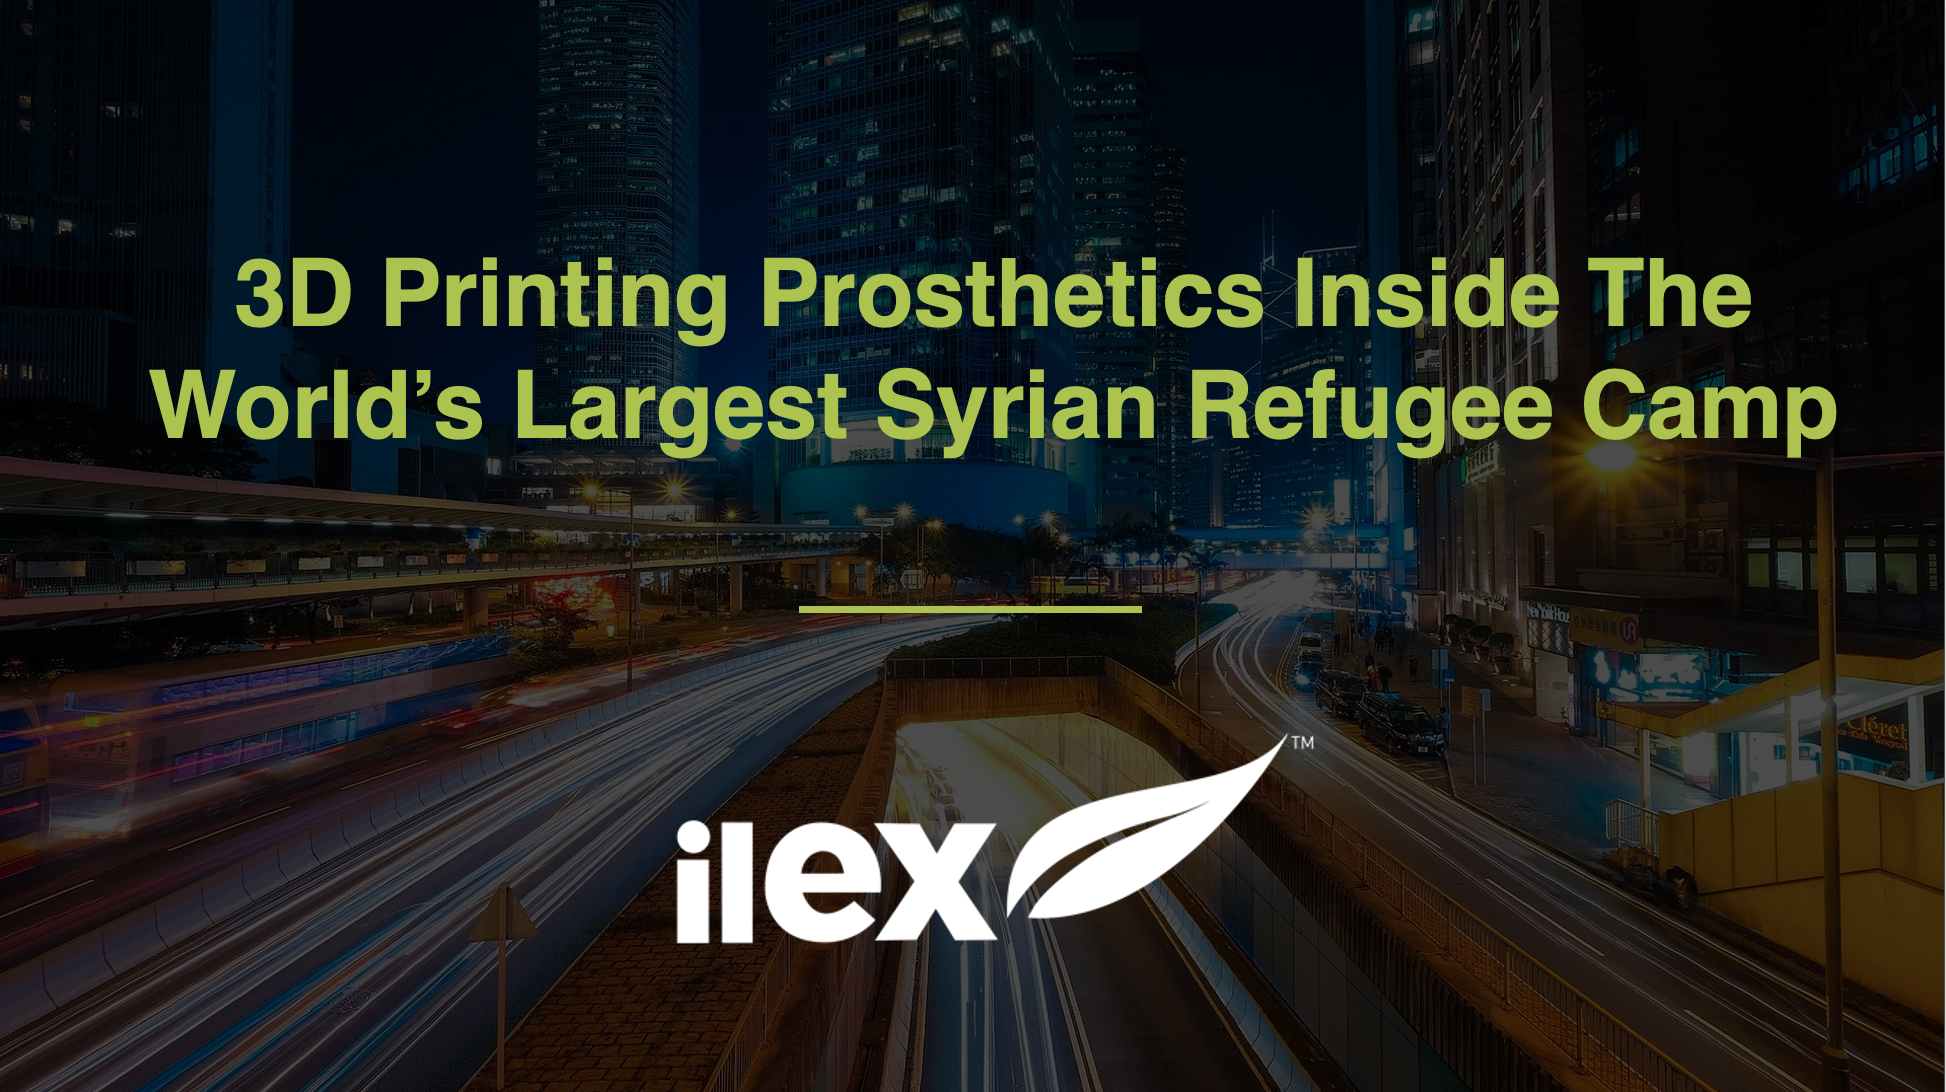 3D PRINTING PROSTHETICS INSIDE THE WORLD'S LARGEST SYRIAN REFUGEE CAMP